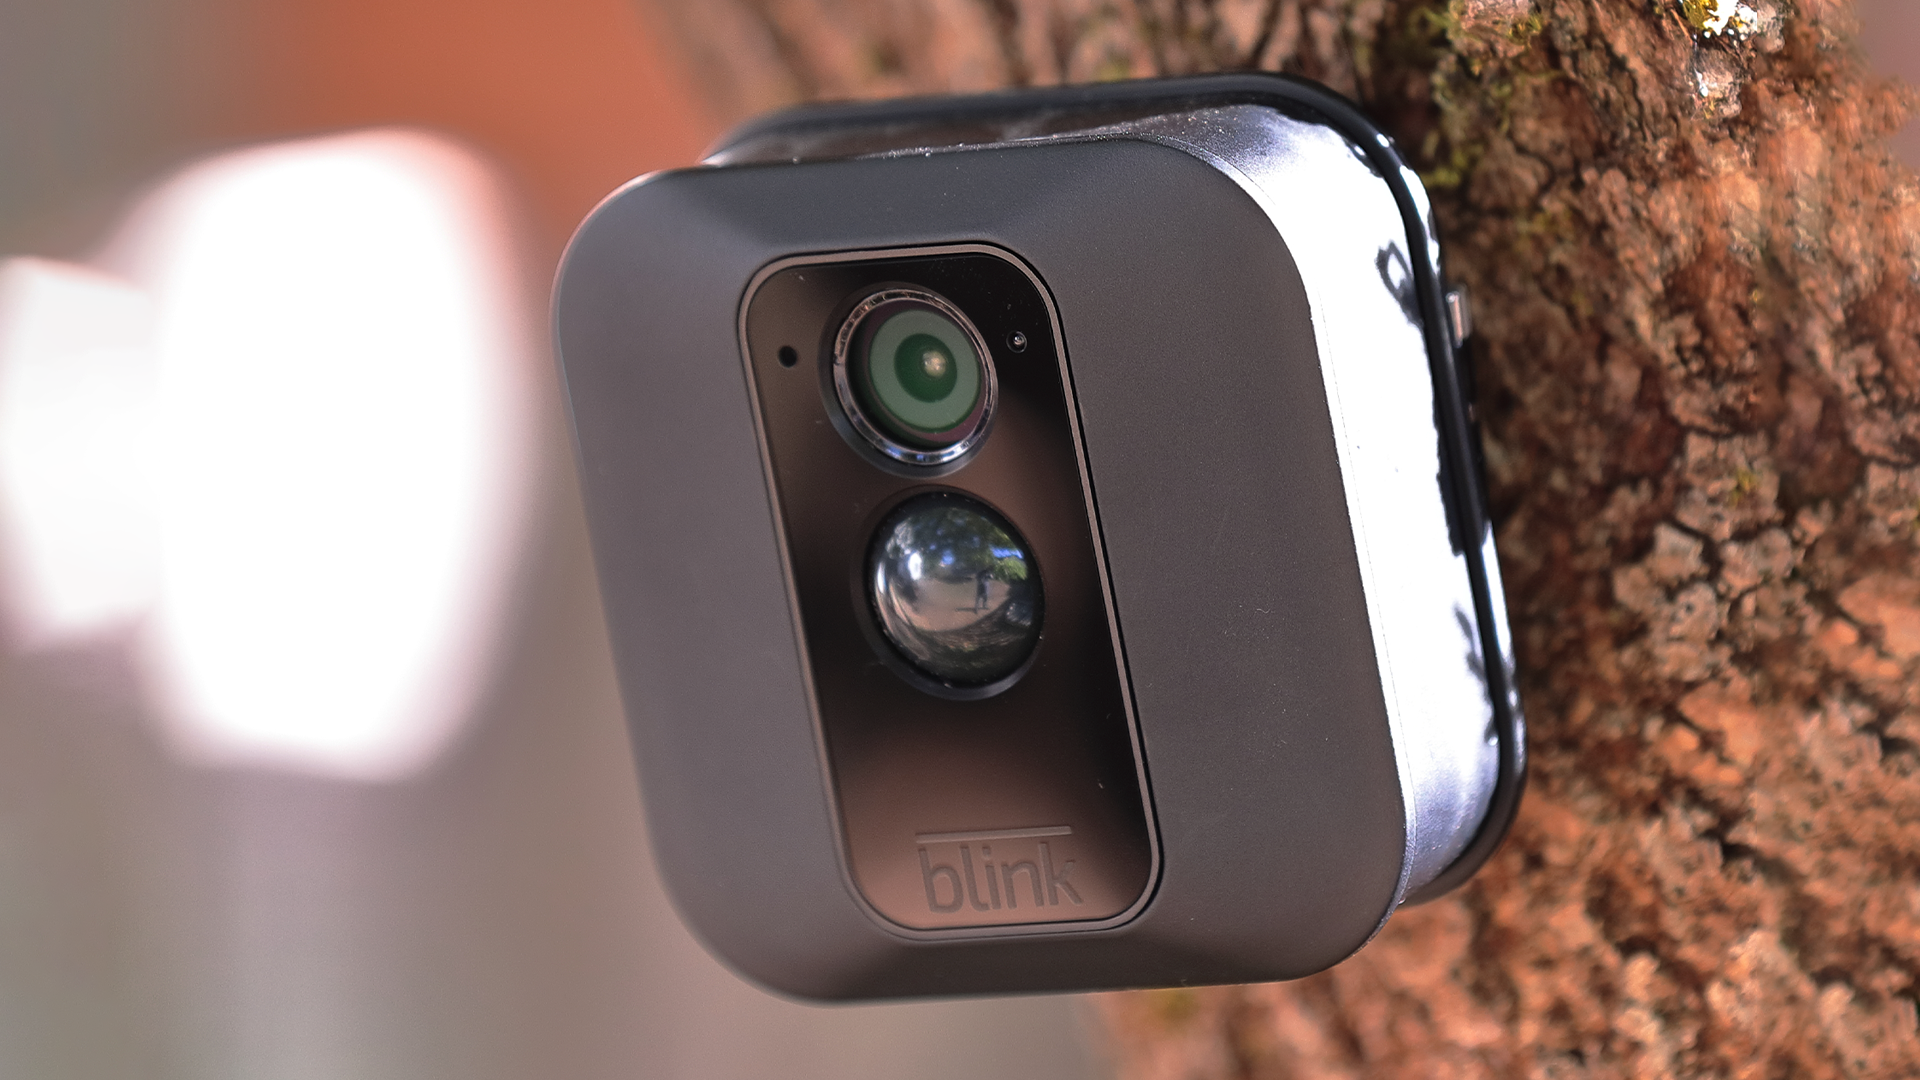 A Blink XT smart security camera installed on a tree.